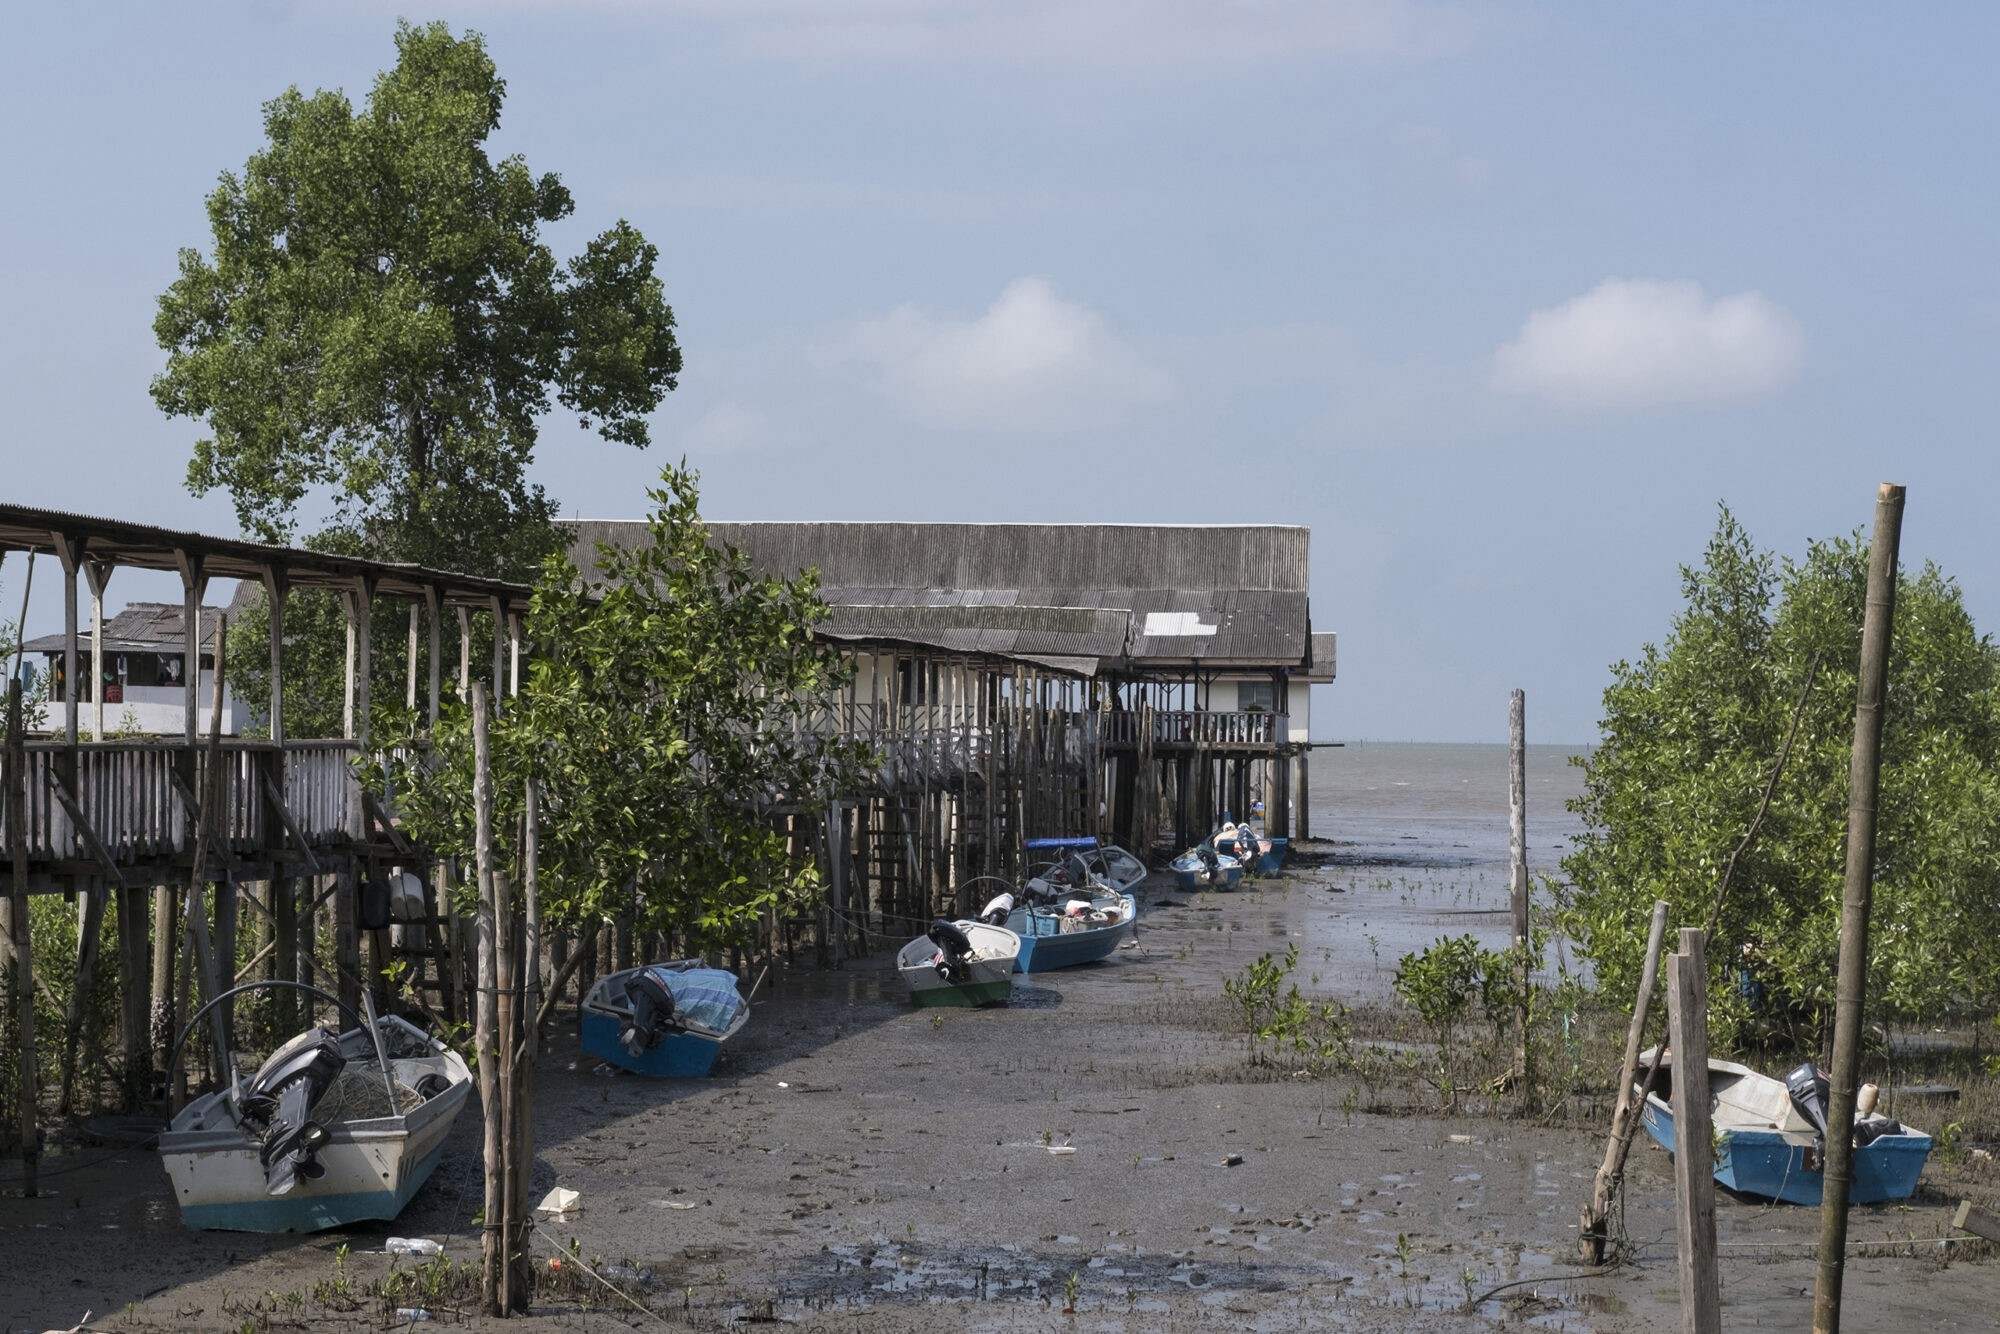 Fishermen’s boats are parked near a peer at low tide on the shore of the gulf surrounding Forest City.